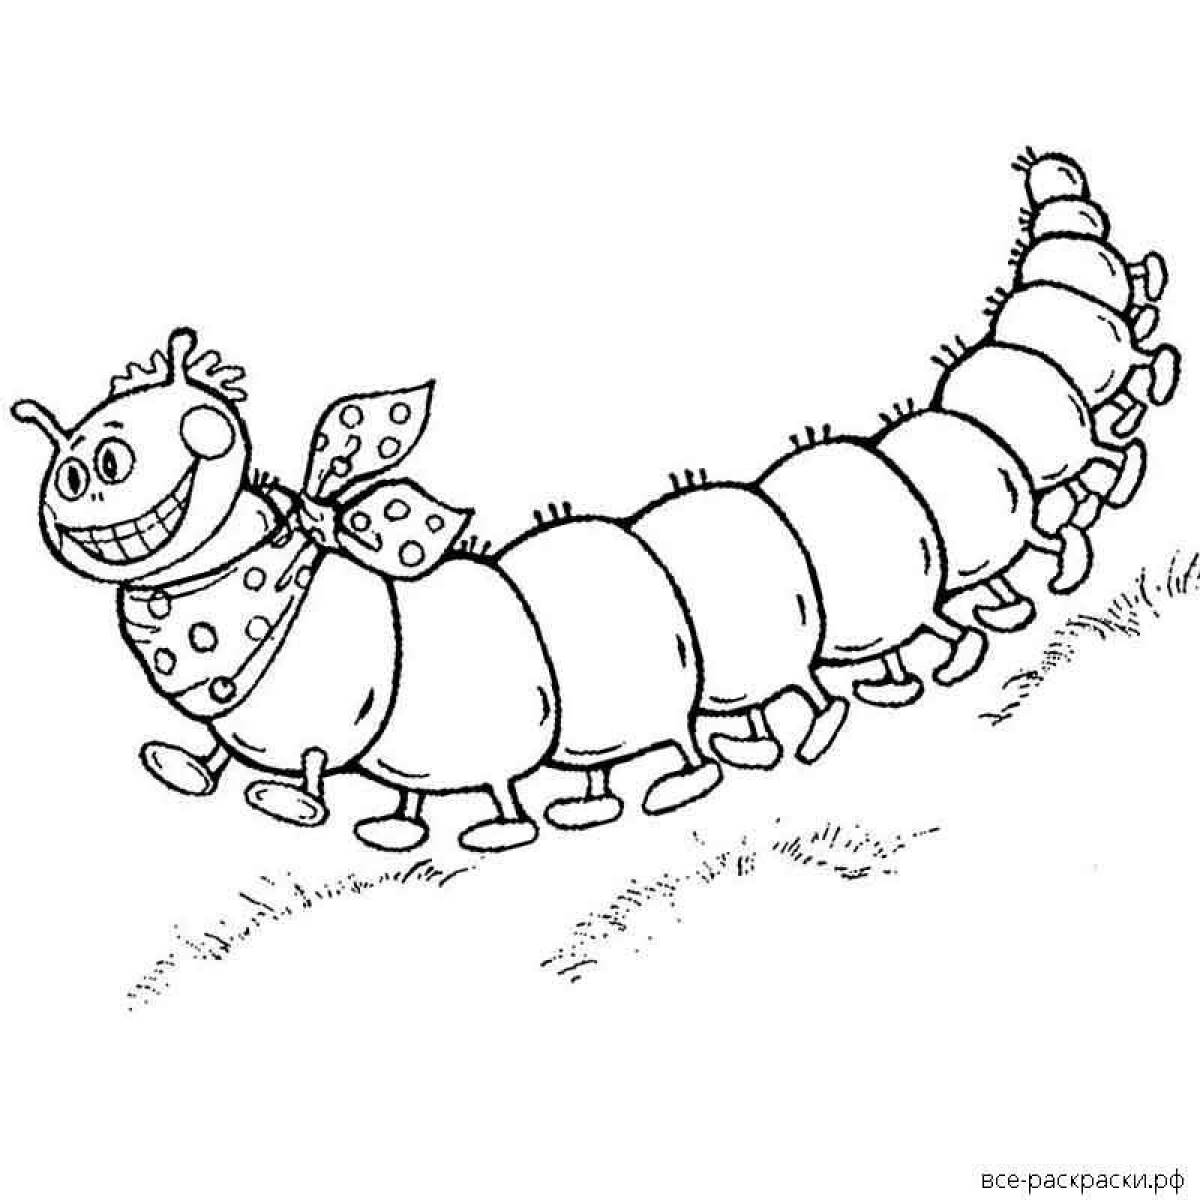 Coloring page dazzling pug caterpillar